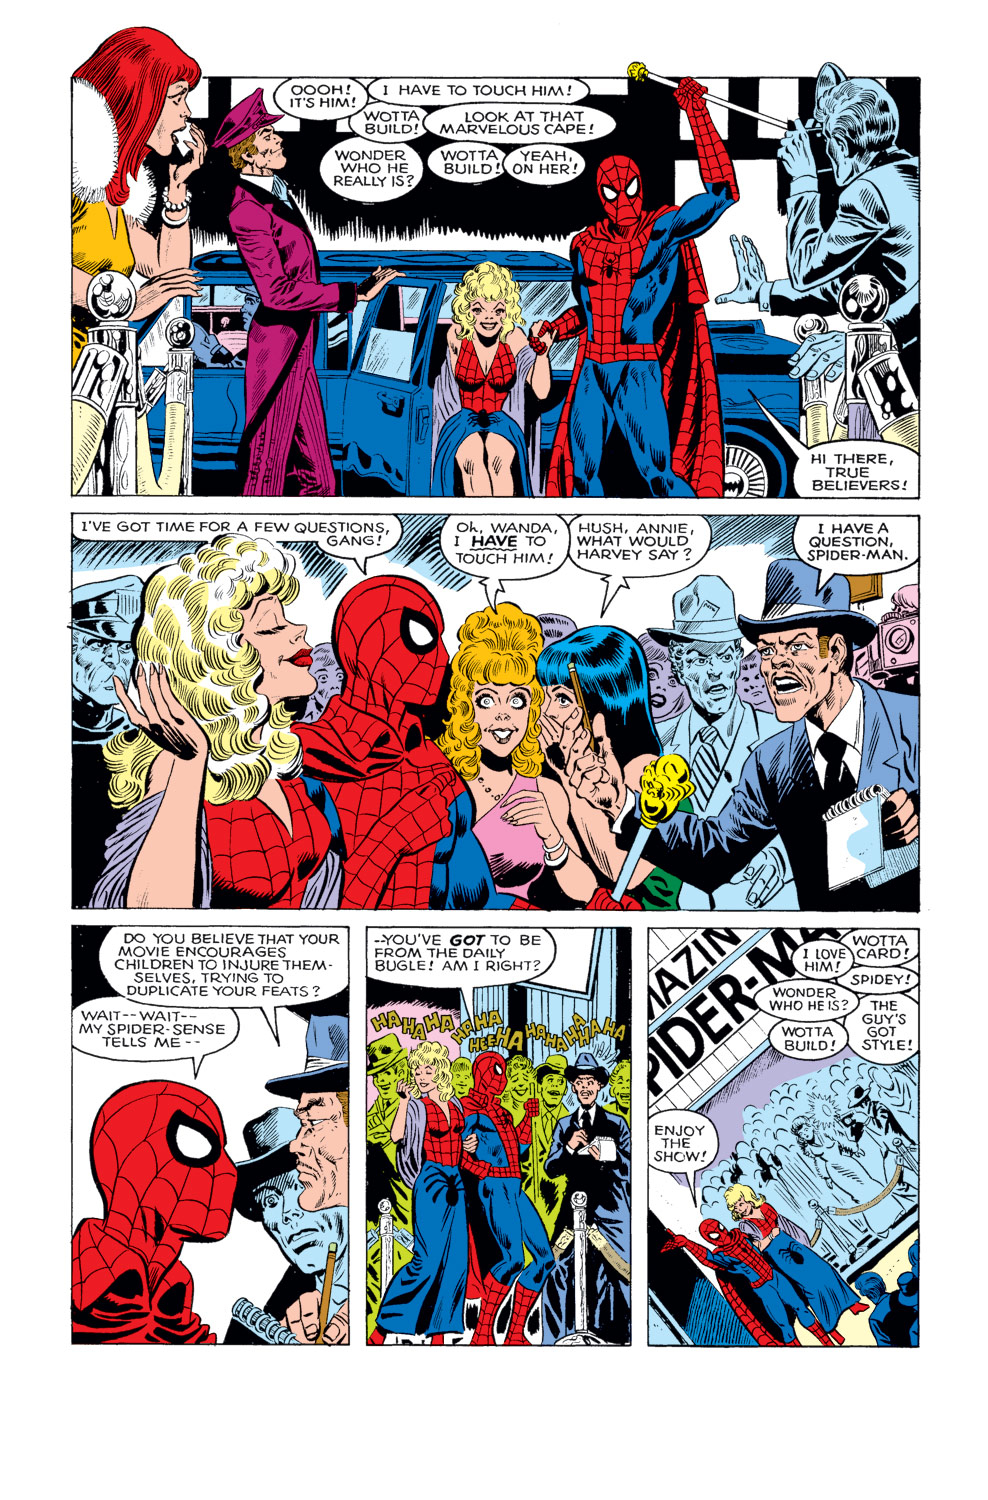 What If? (1977) issue 19 - Spider-Man had never become a crimefighter - Page 10